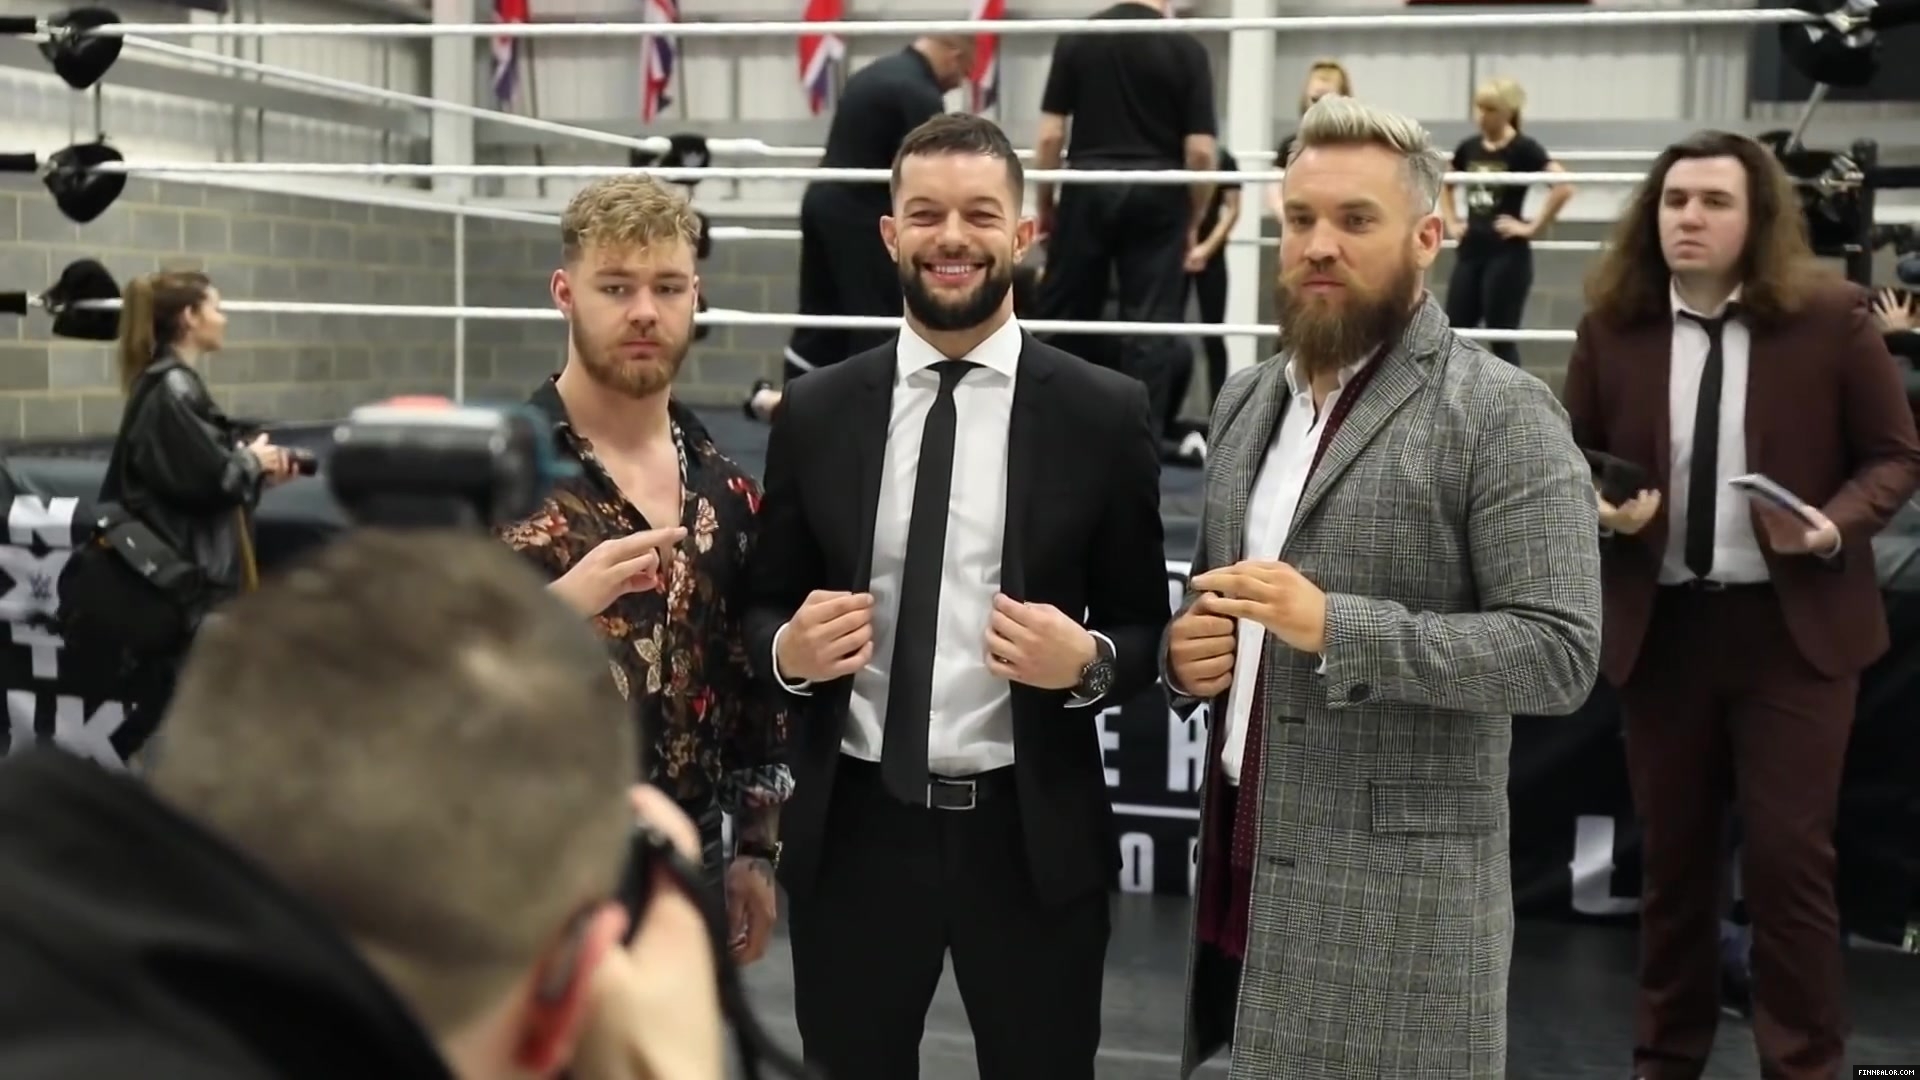 WWE_Superstar_FINN_BALOR_joins_MOUSTACHE_MOUNTAIN_at_the_opening_of_the_NXT_UK_PC_042.jpg